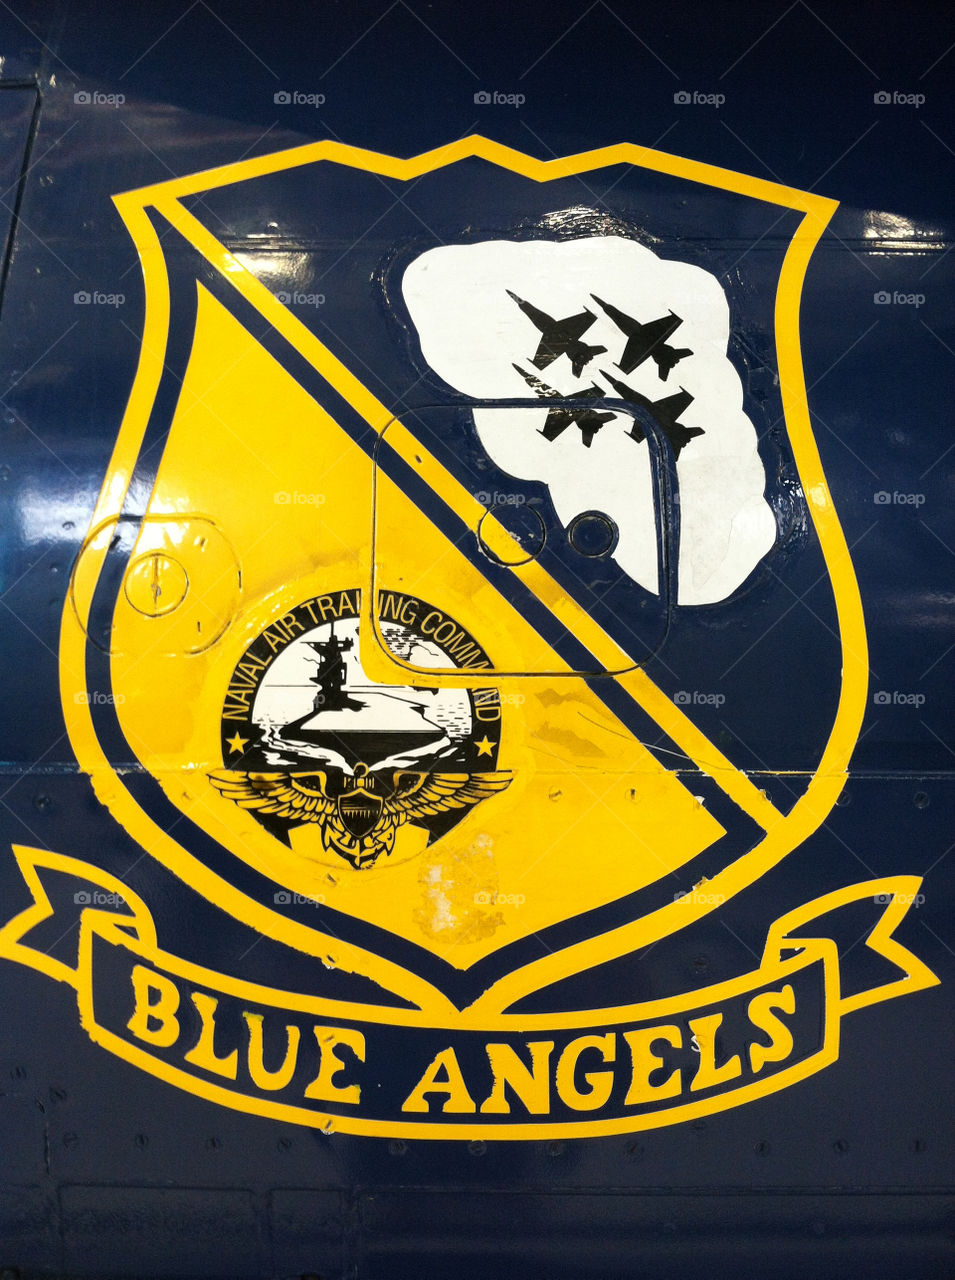 An emblem painted on the side of a retired U.S. Naval Flight